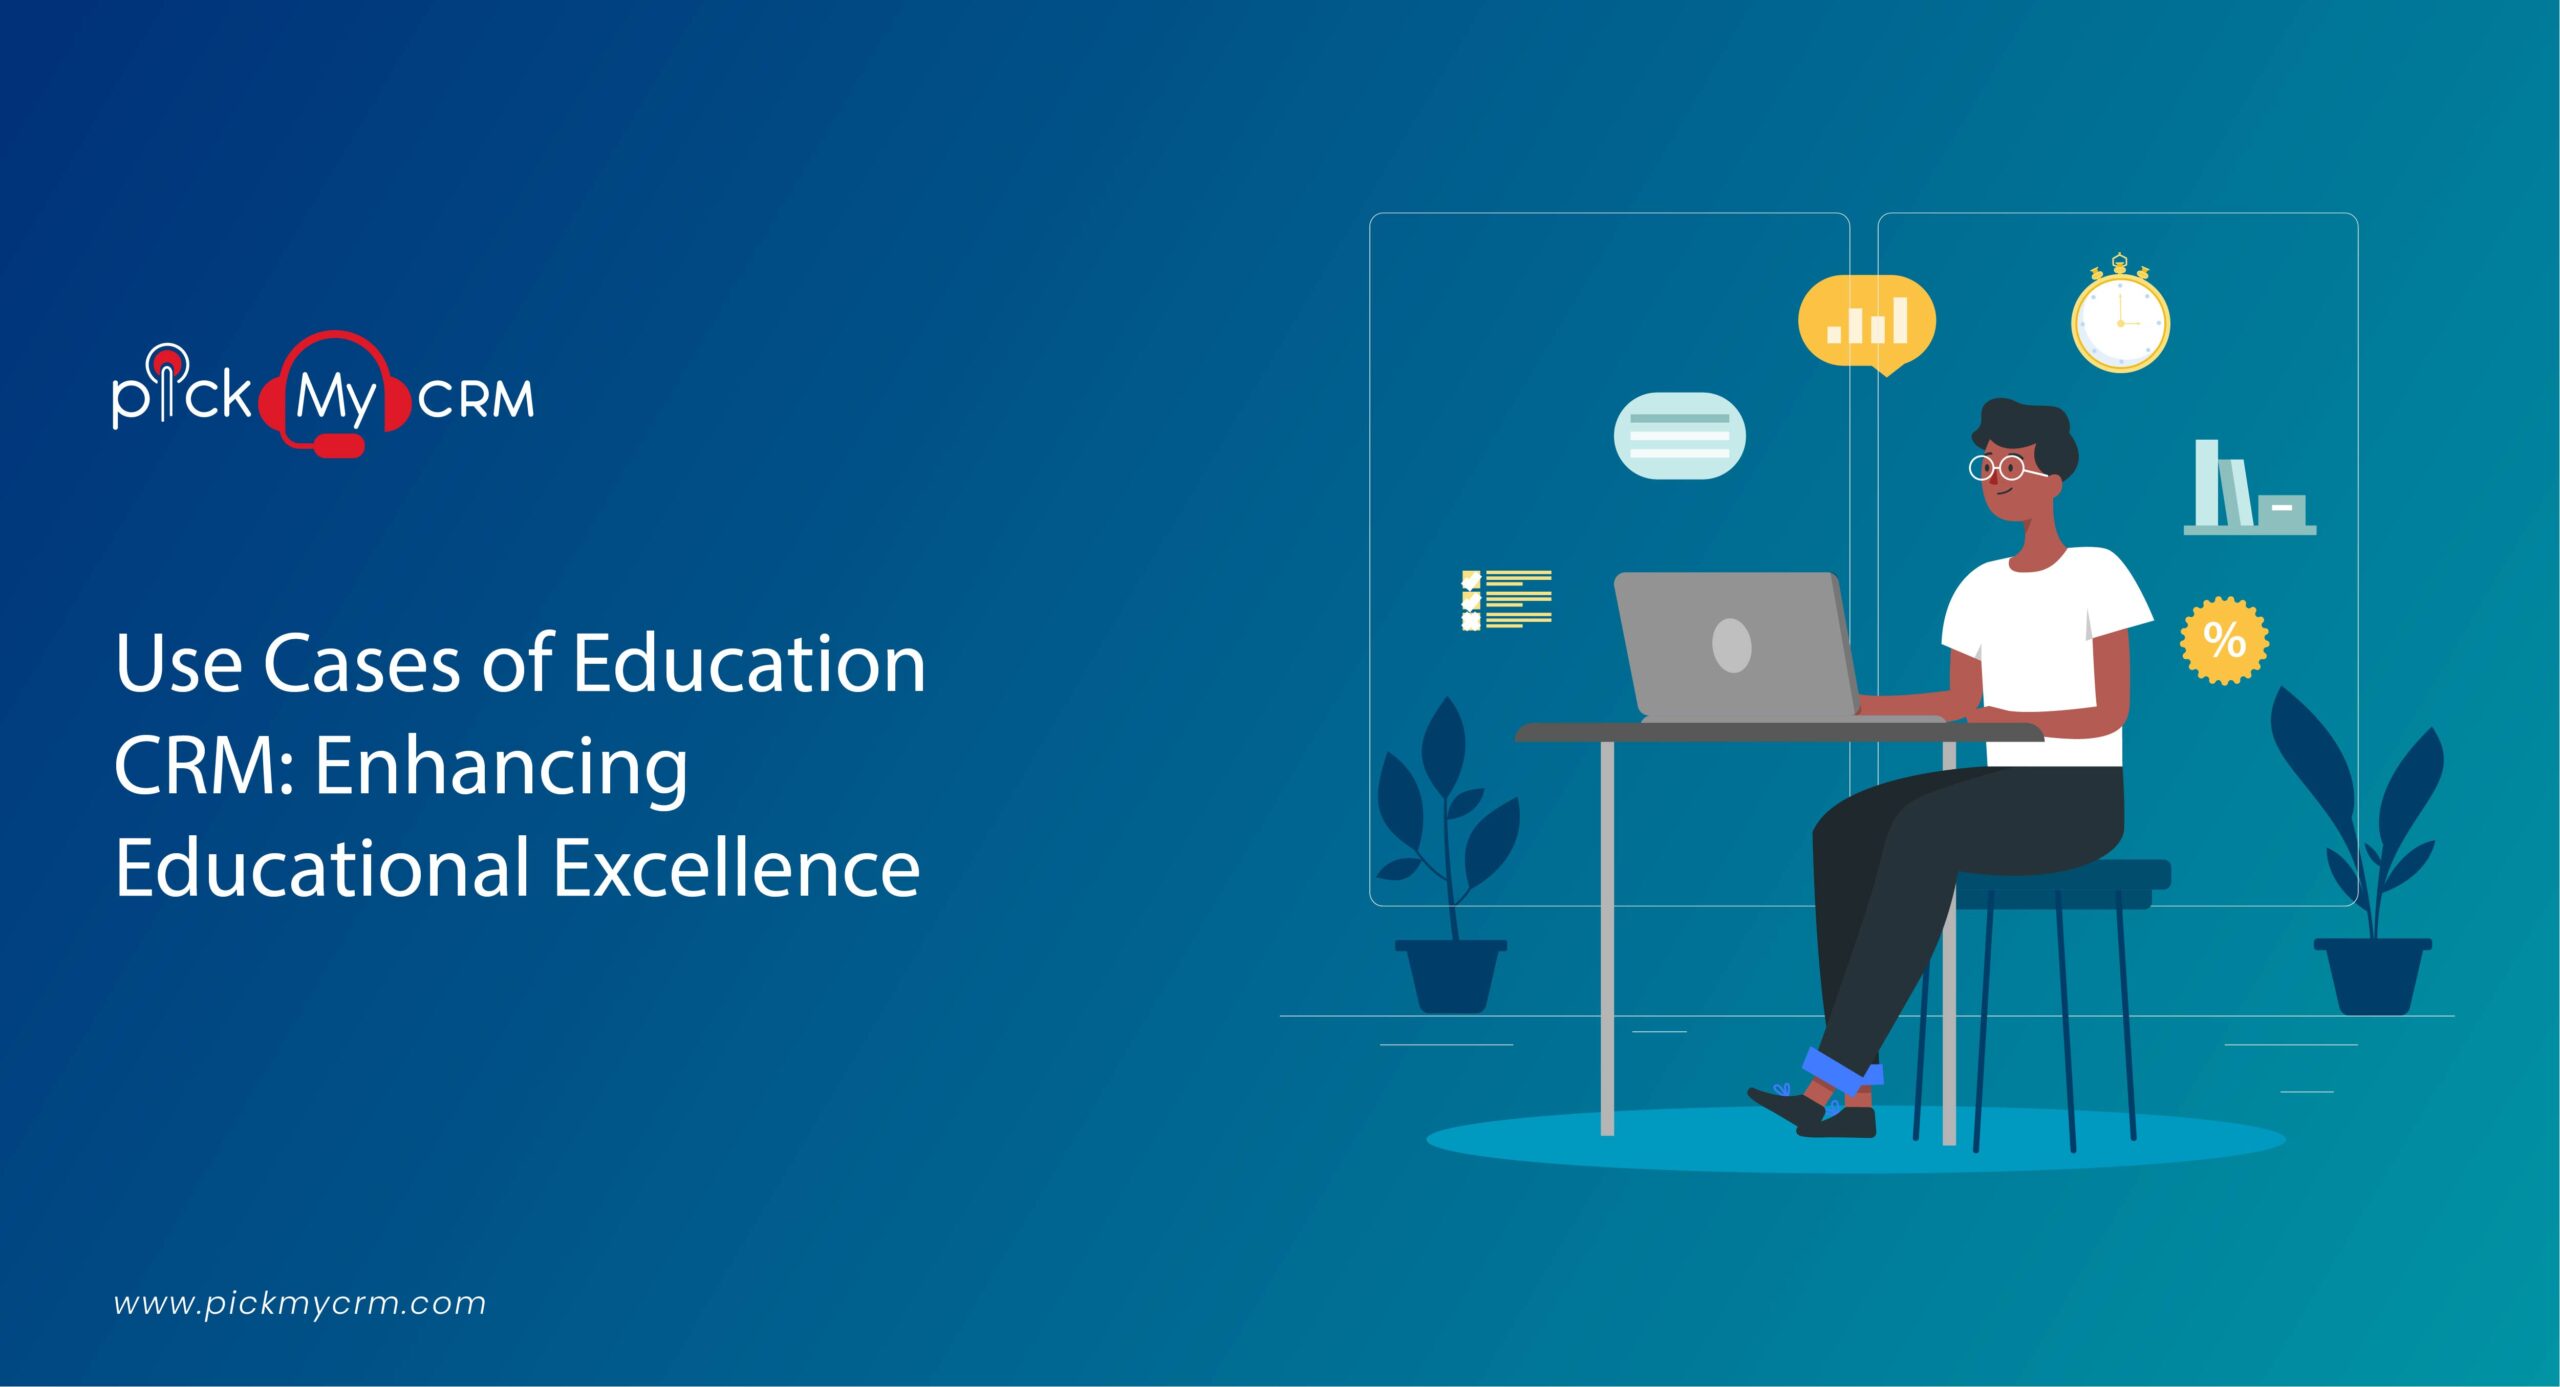 Use Cases of Education CRM: Enhancing Educational Excellence